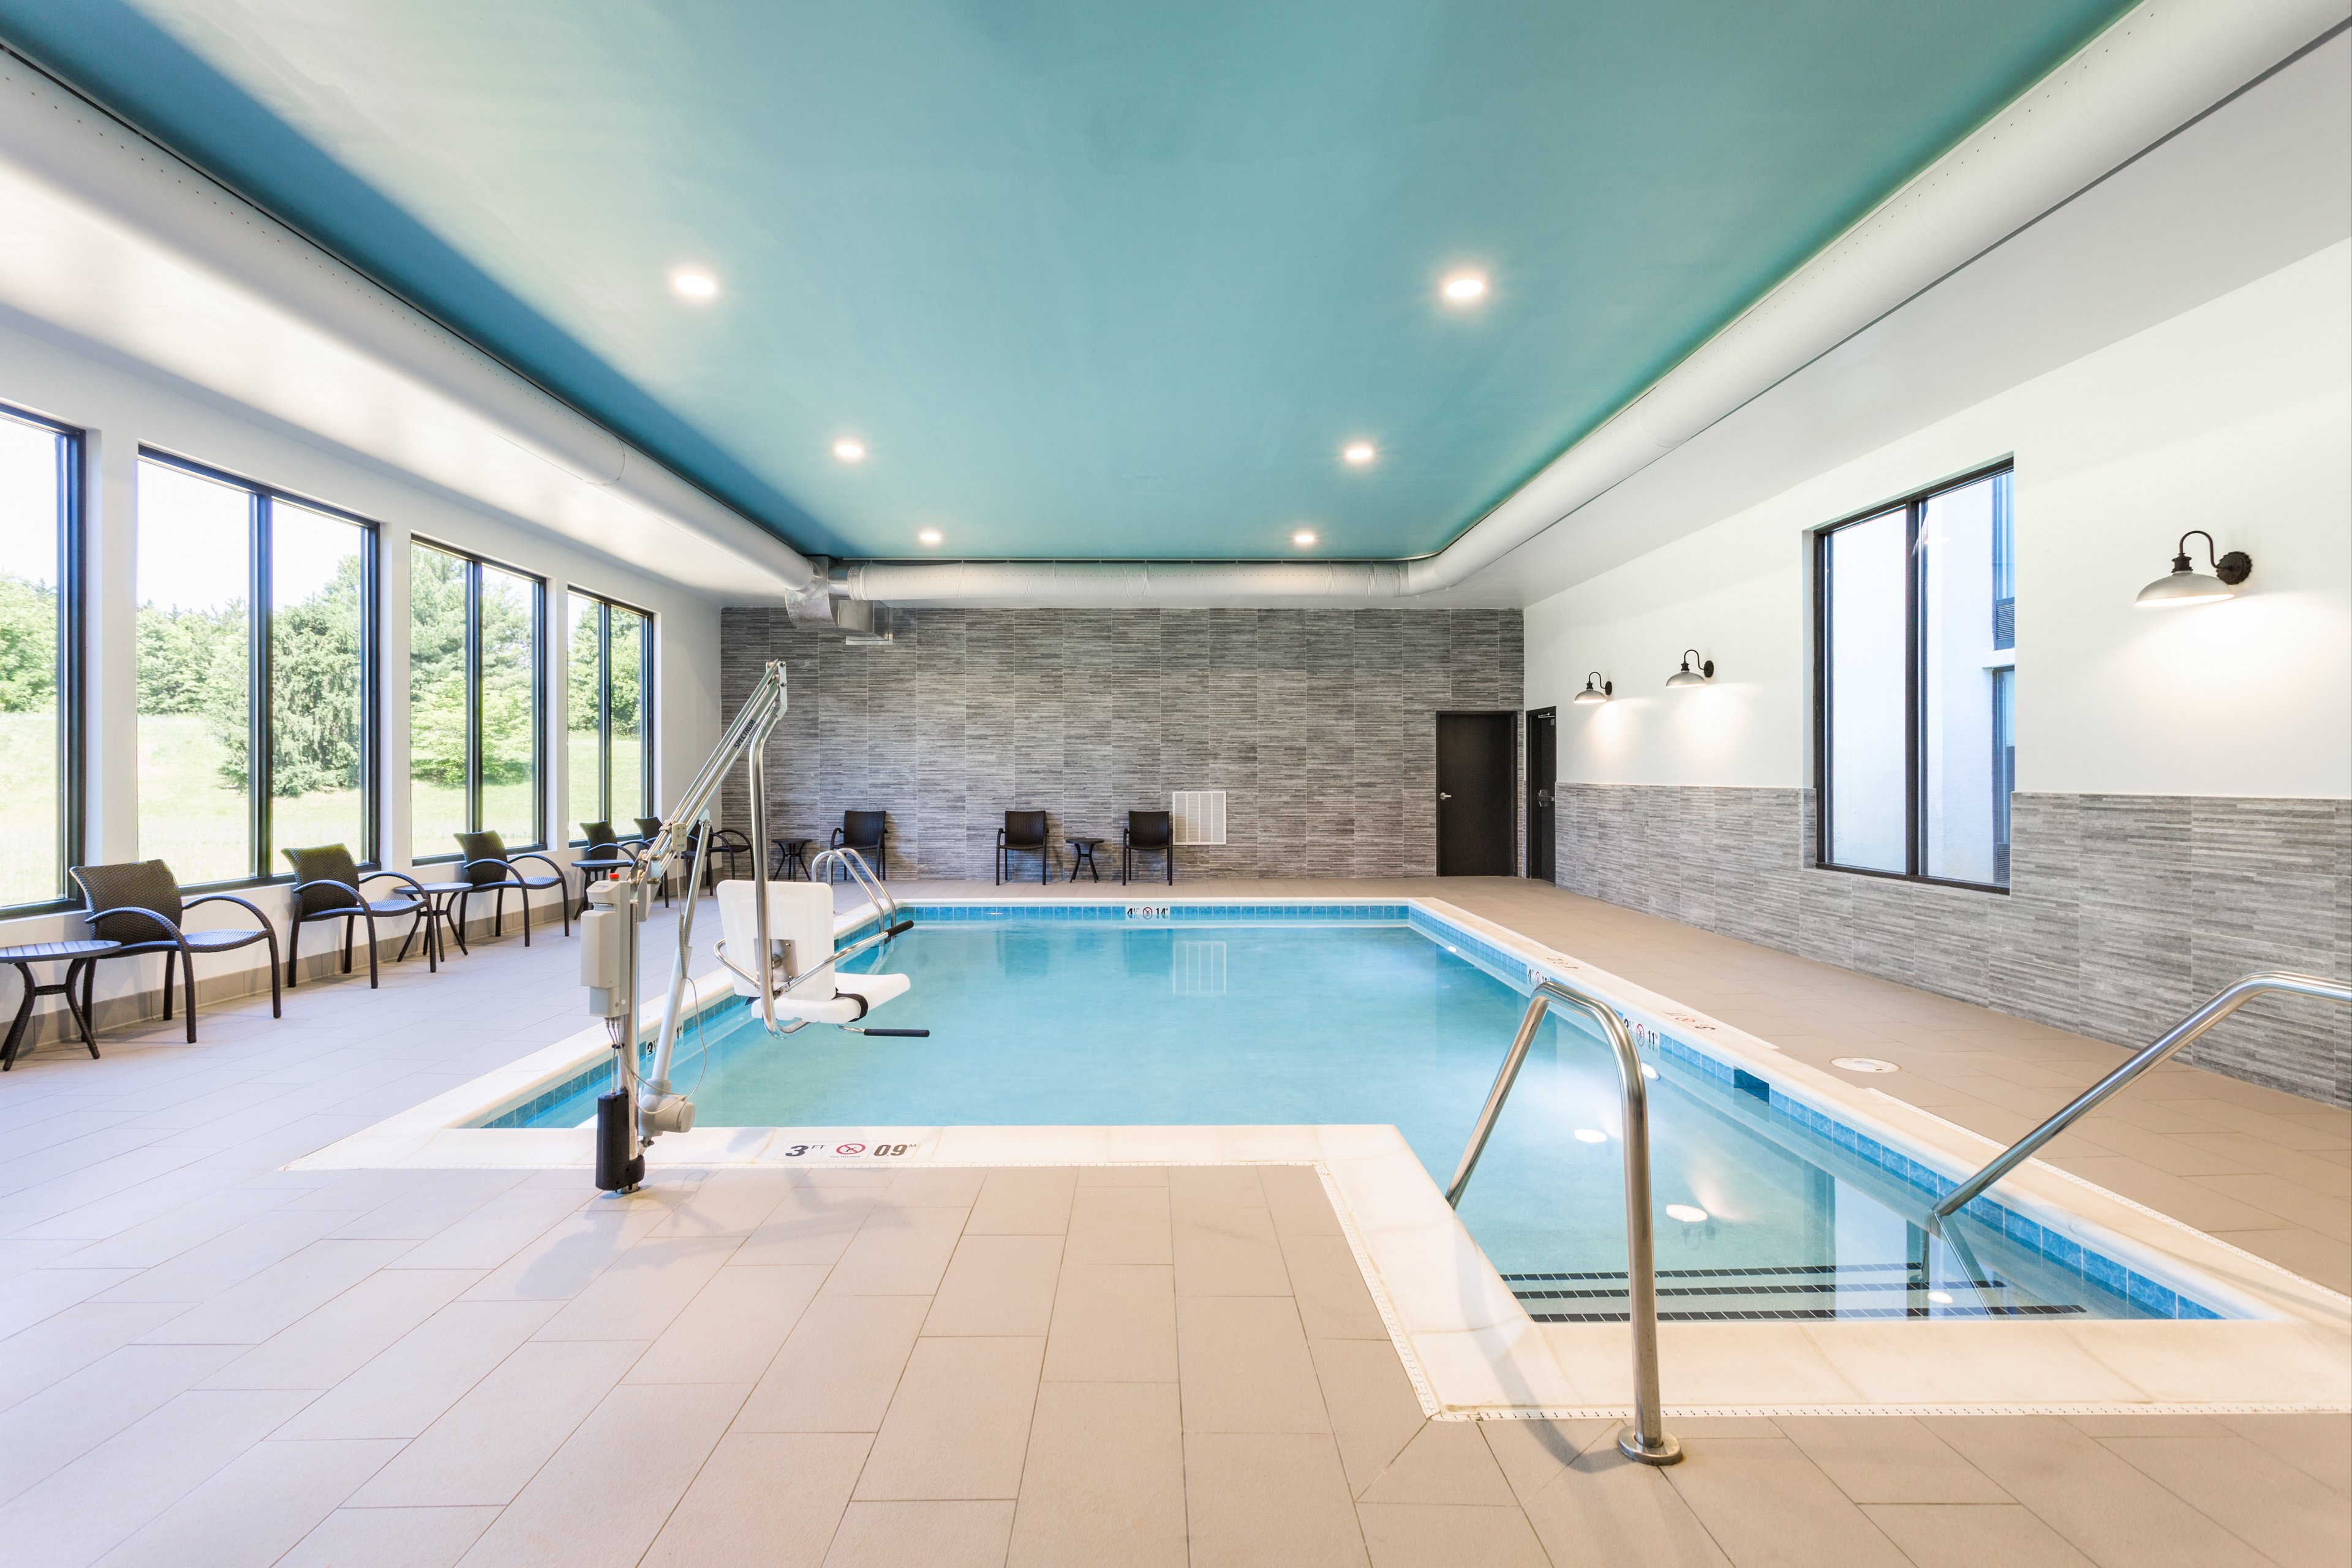 Take a morning splash or relax after a long day in our indoor pool